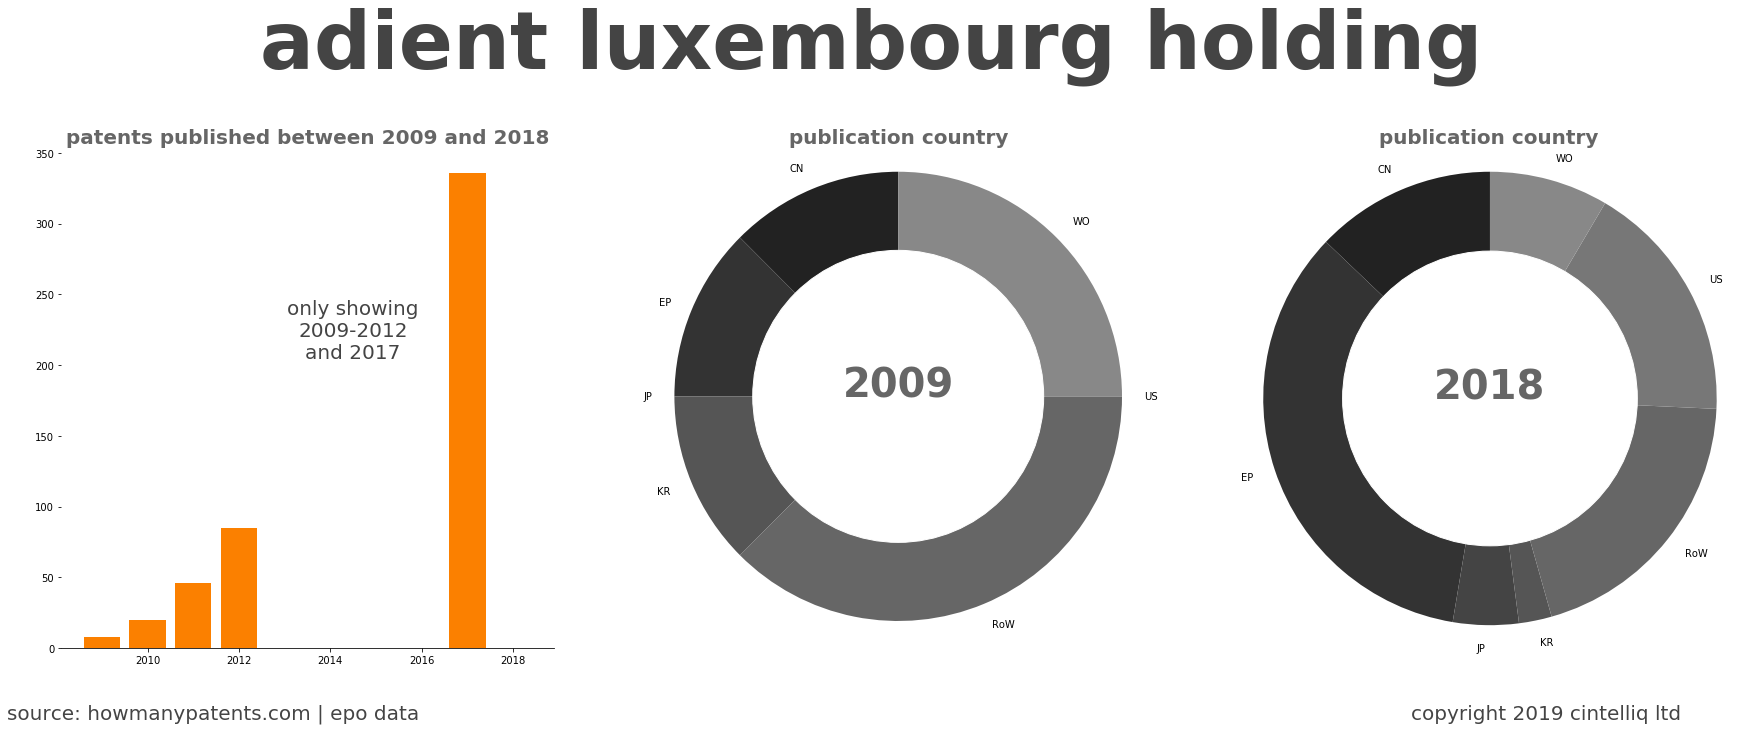 summary of patents for Adient Luxembourg Holding